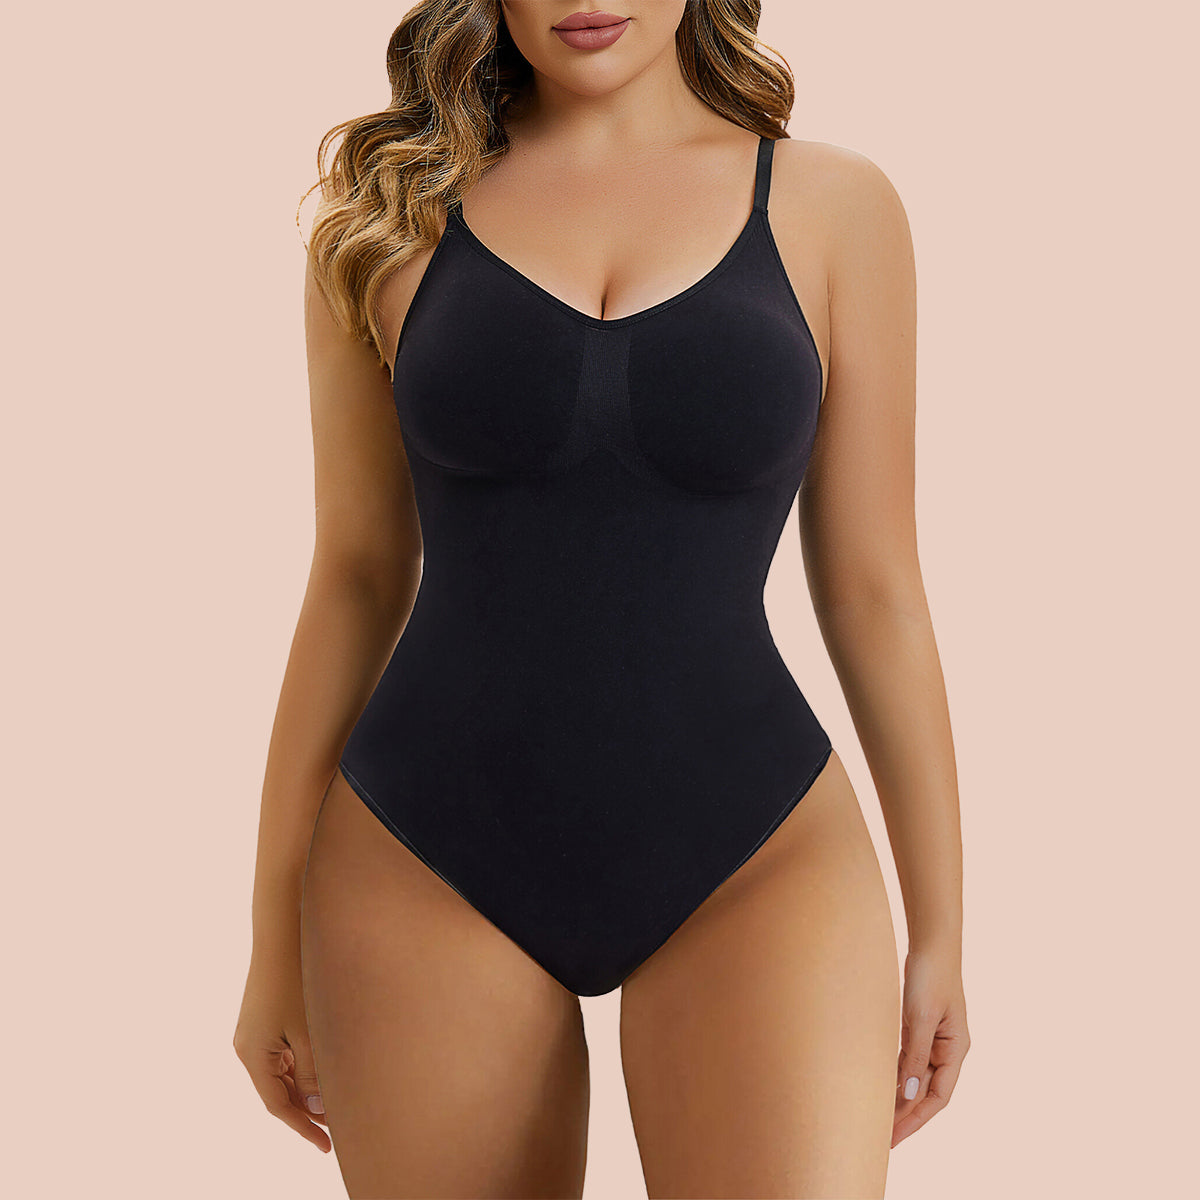 Womens Body Suit Shaper Tummy Control Post Surgery Smooths Belly